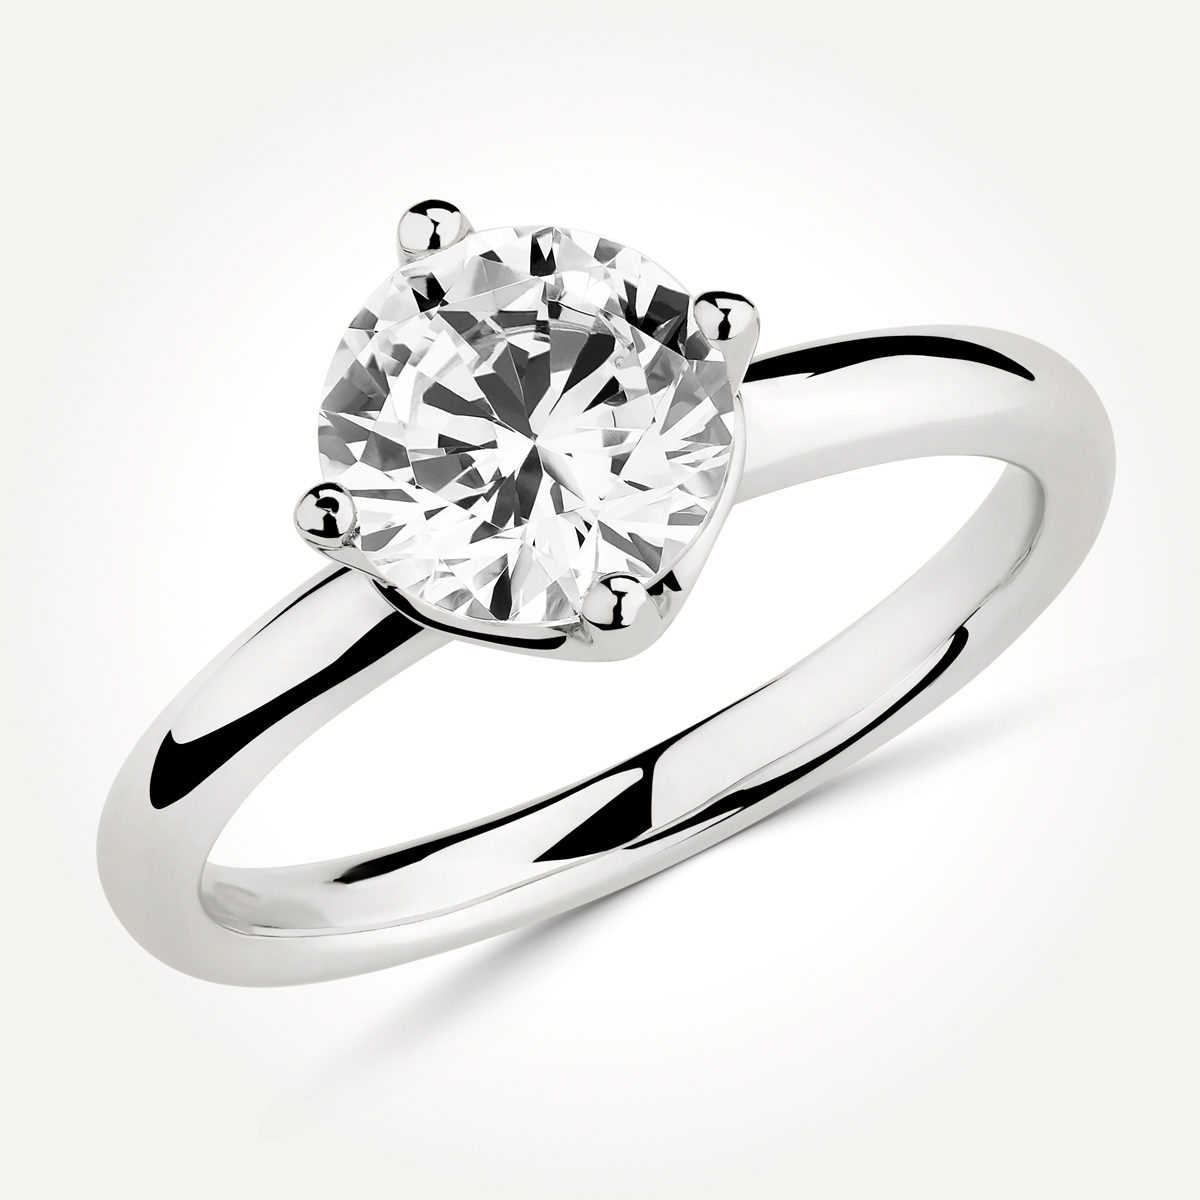 Solitaire Diamond Engagement Ring - Style 70690